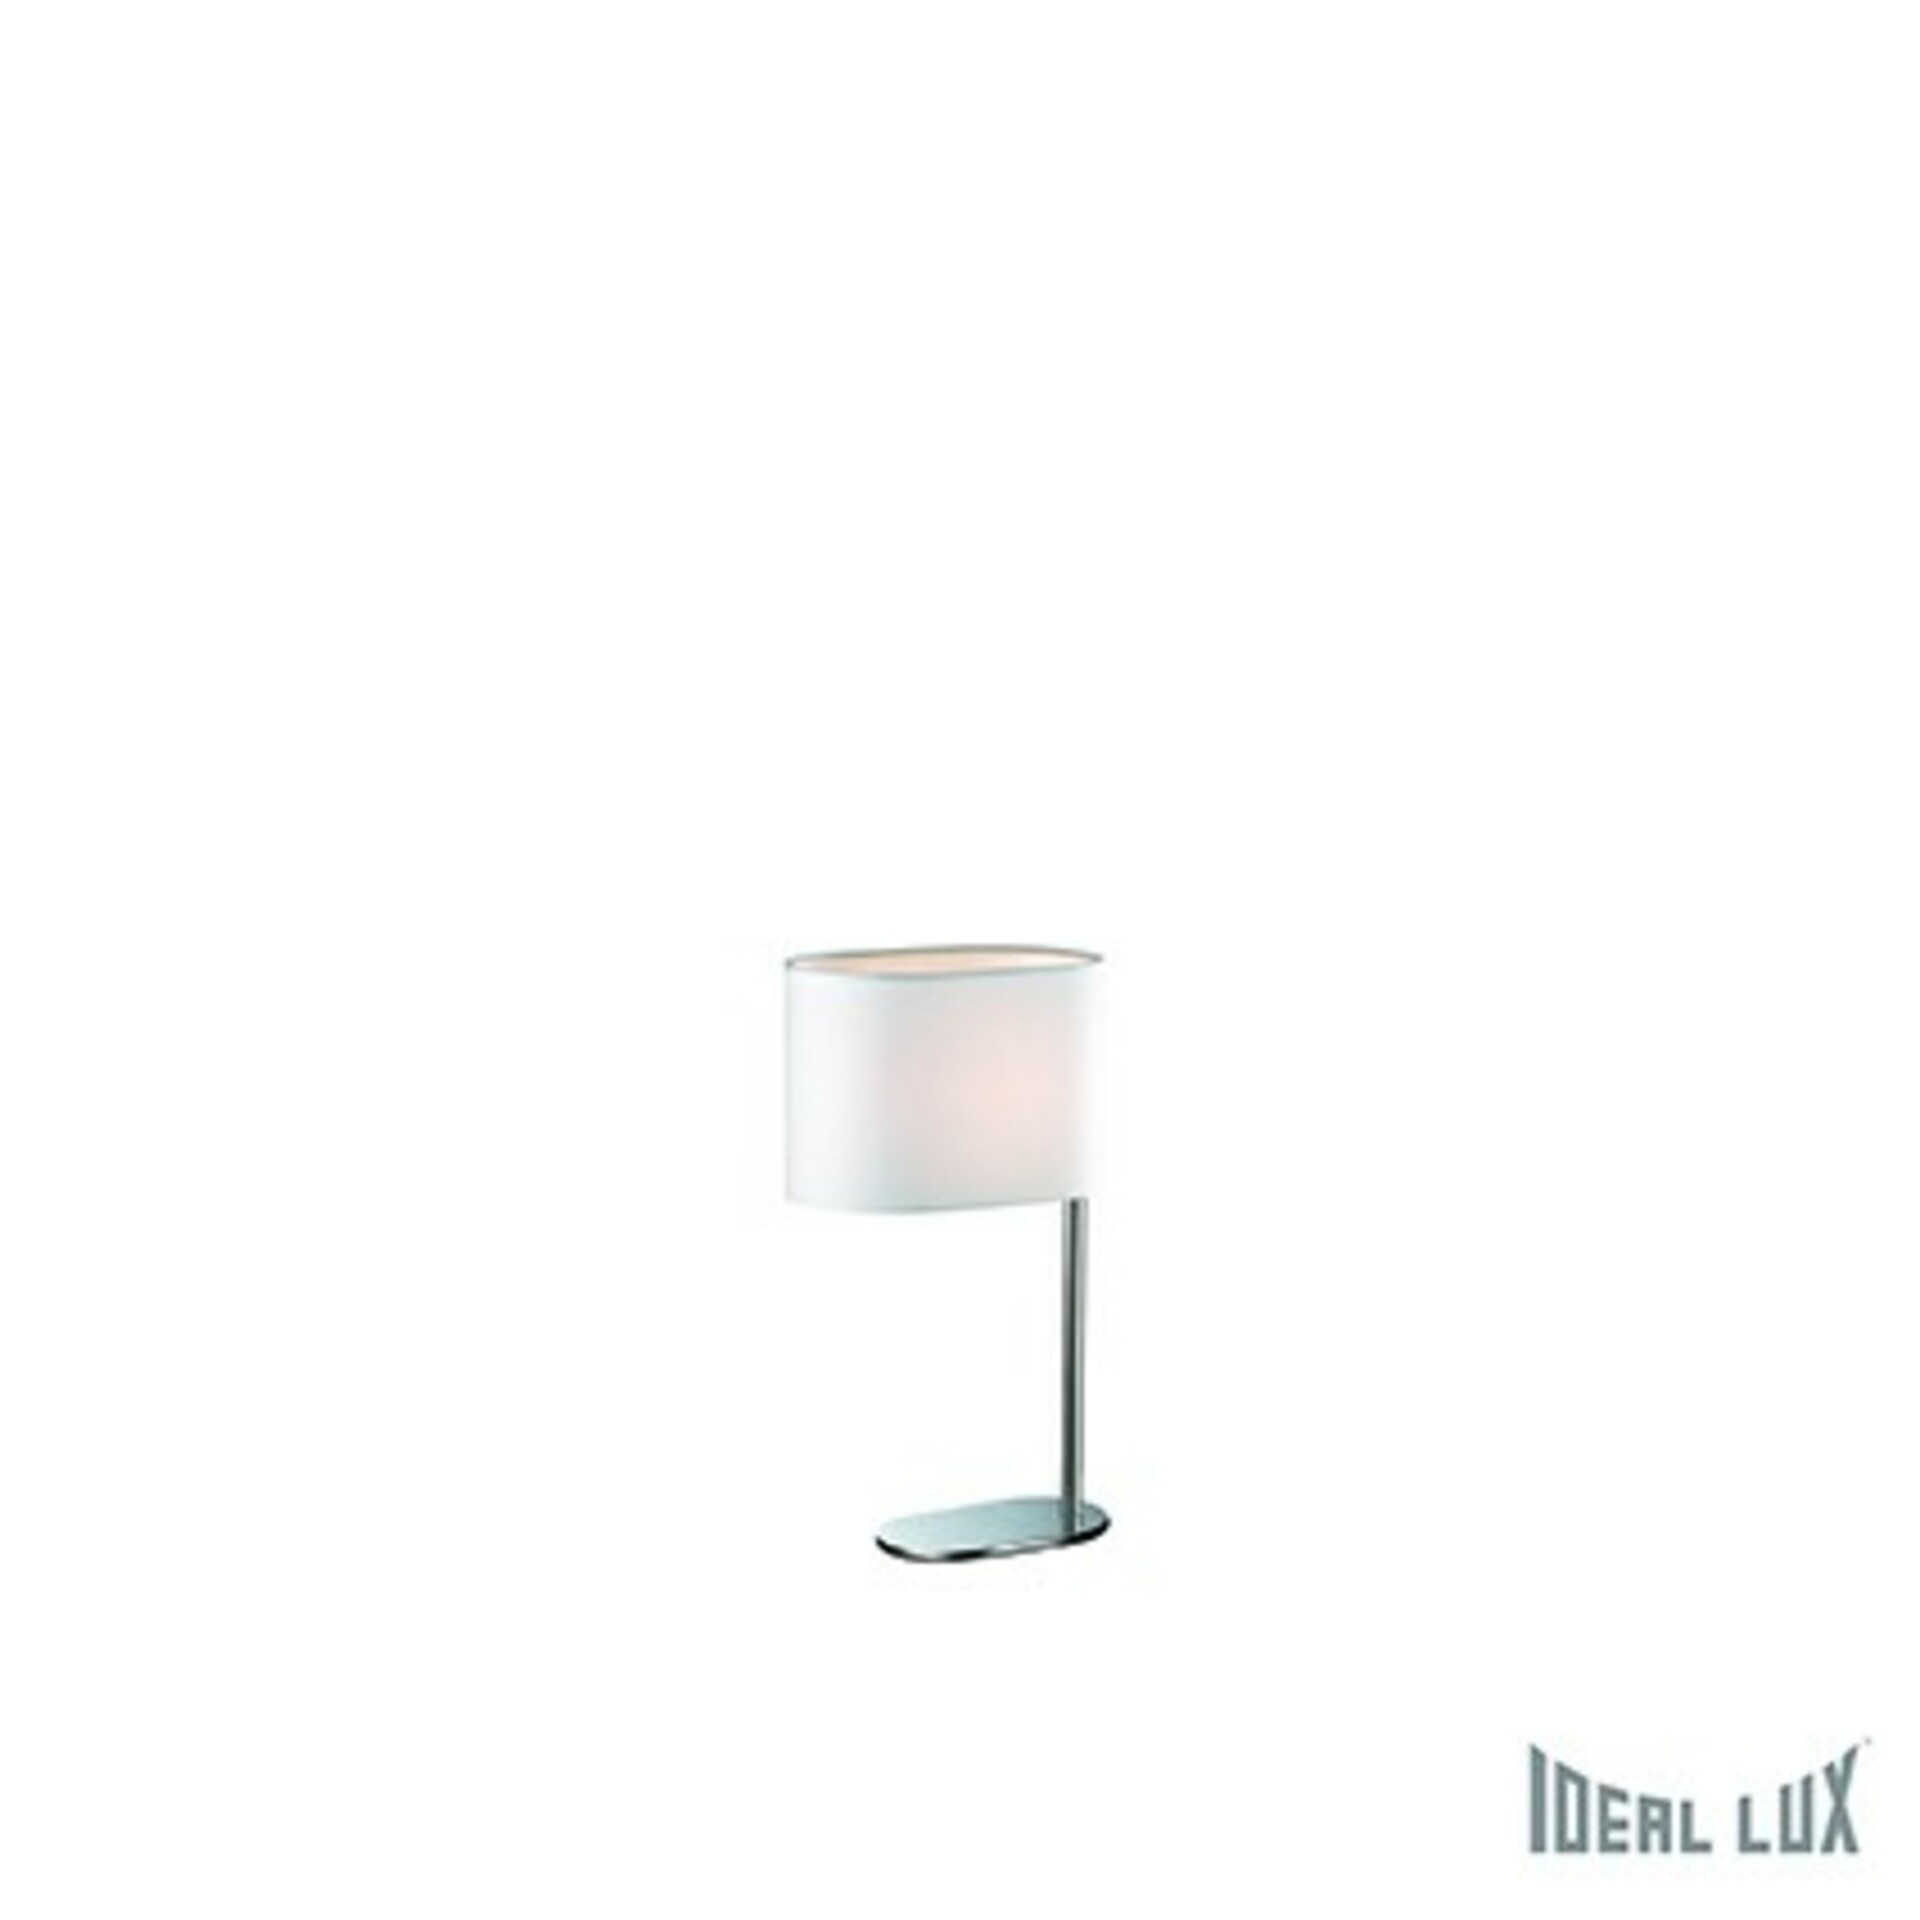 Ideal Lux SHERATON TL1 SMALL BIANCO LAMPA STOLNÍ 075013